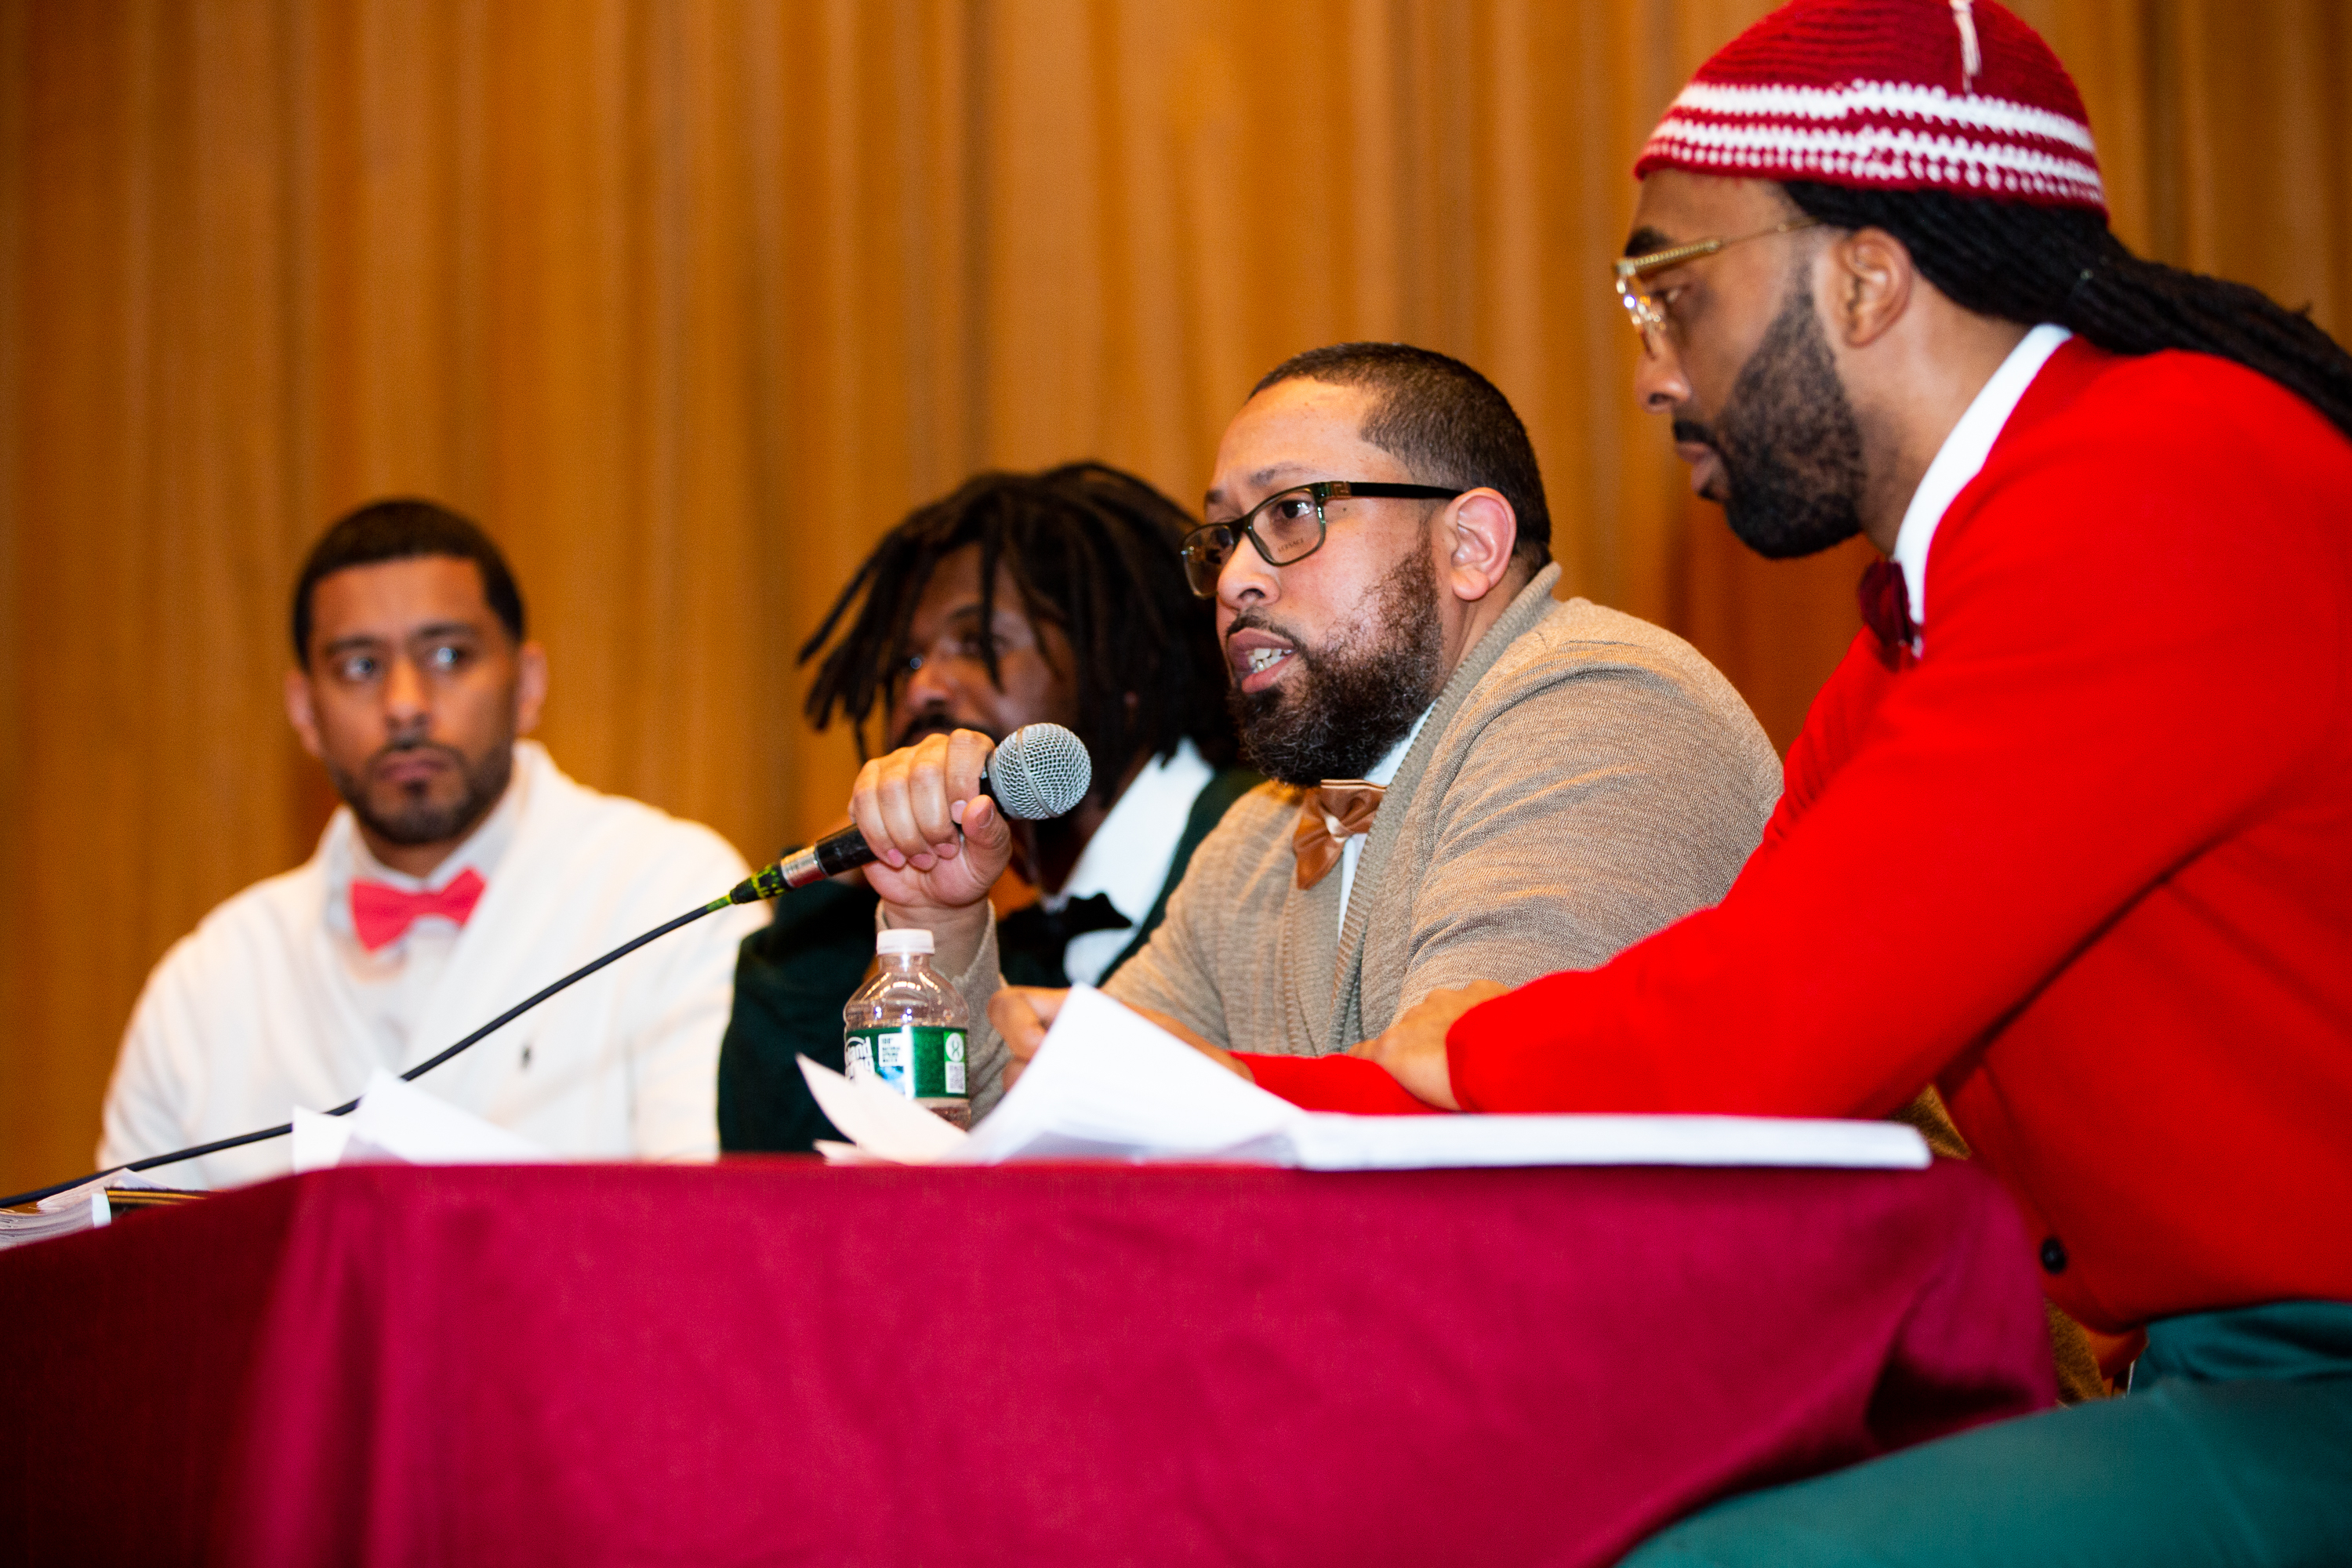 Four members of the Bard Prison Initiative Debate team sit at a table, while one speaks into a microphone